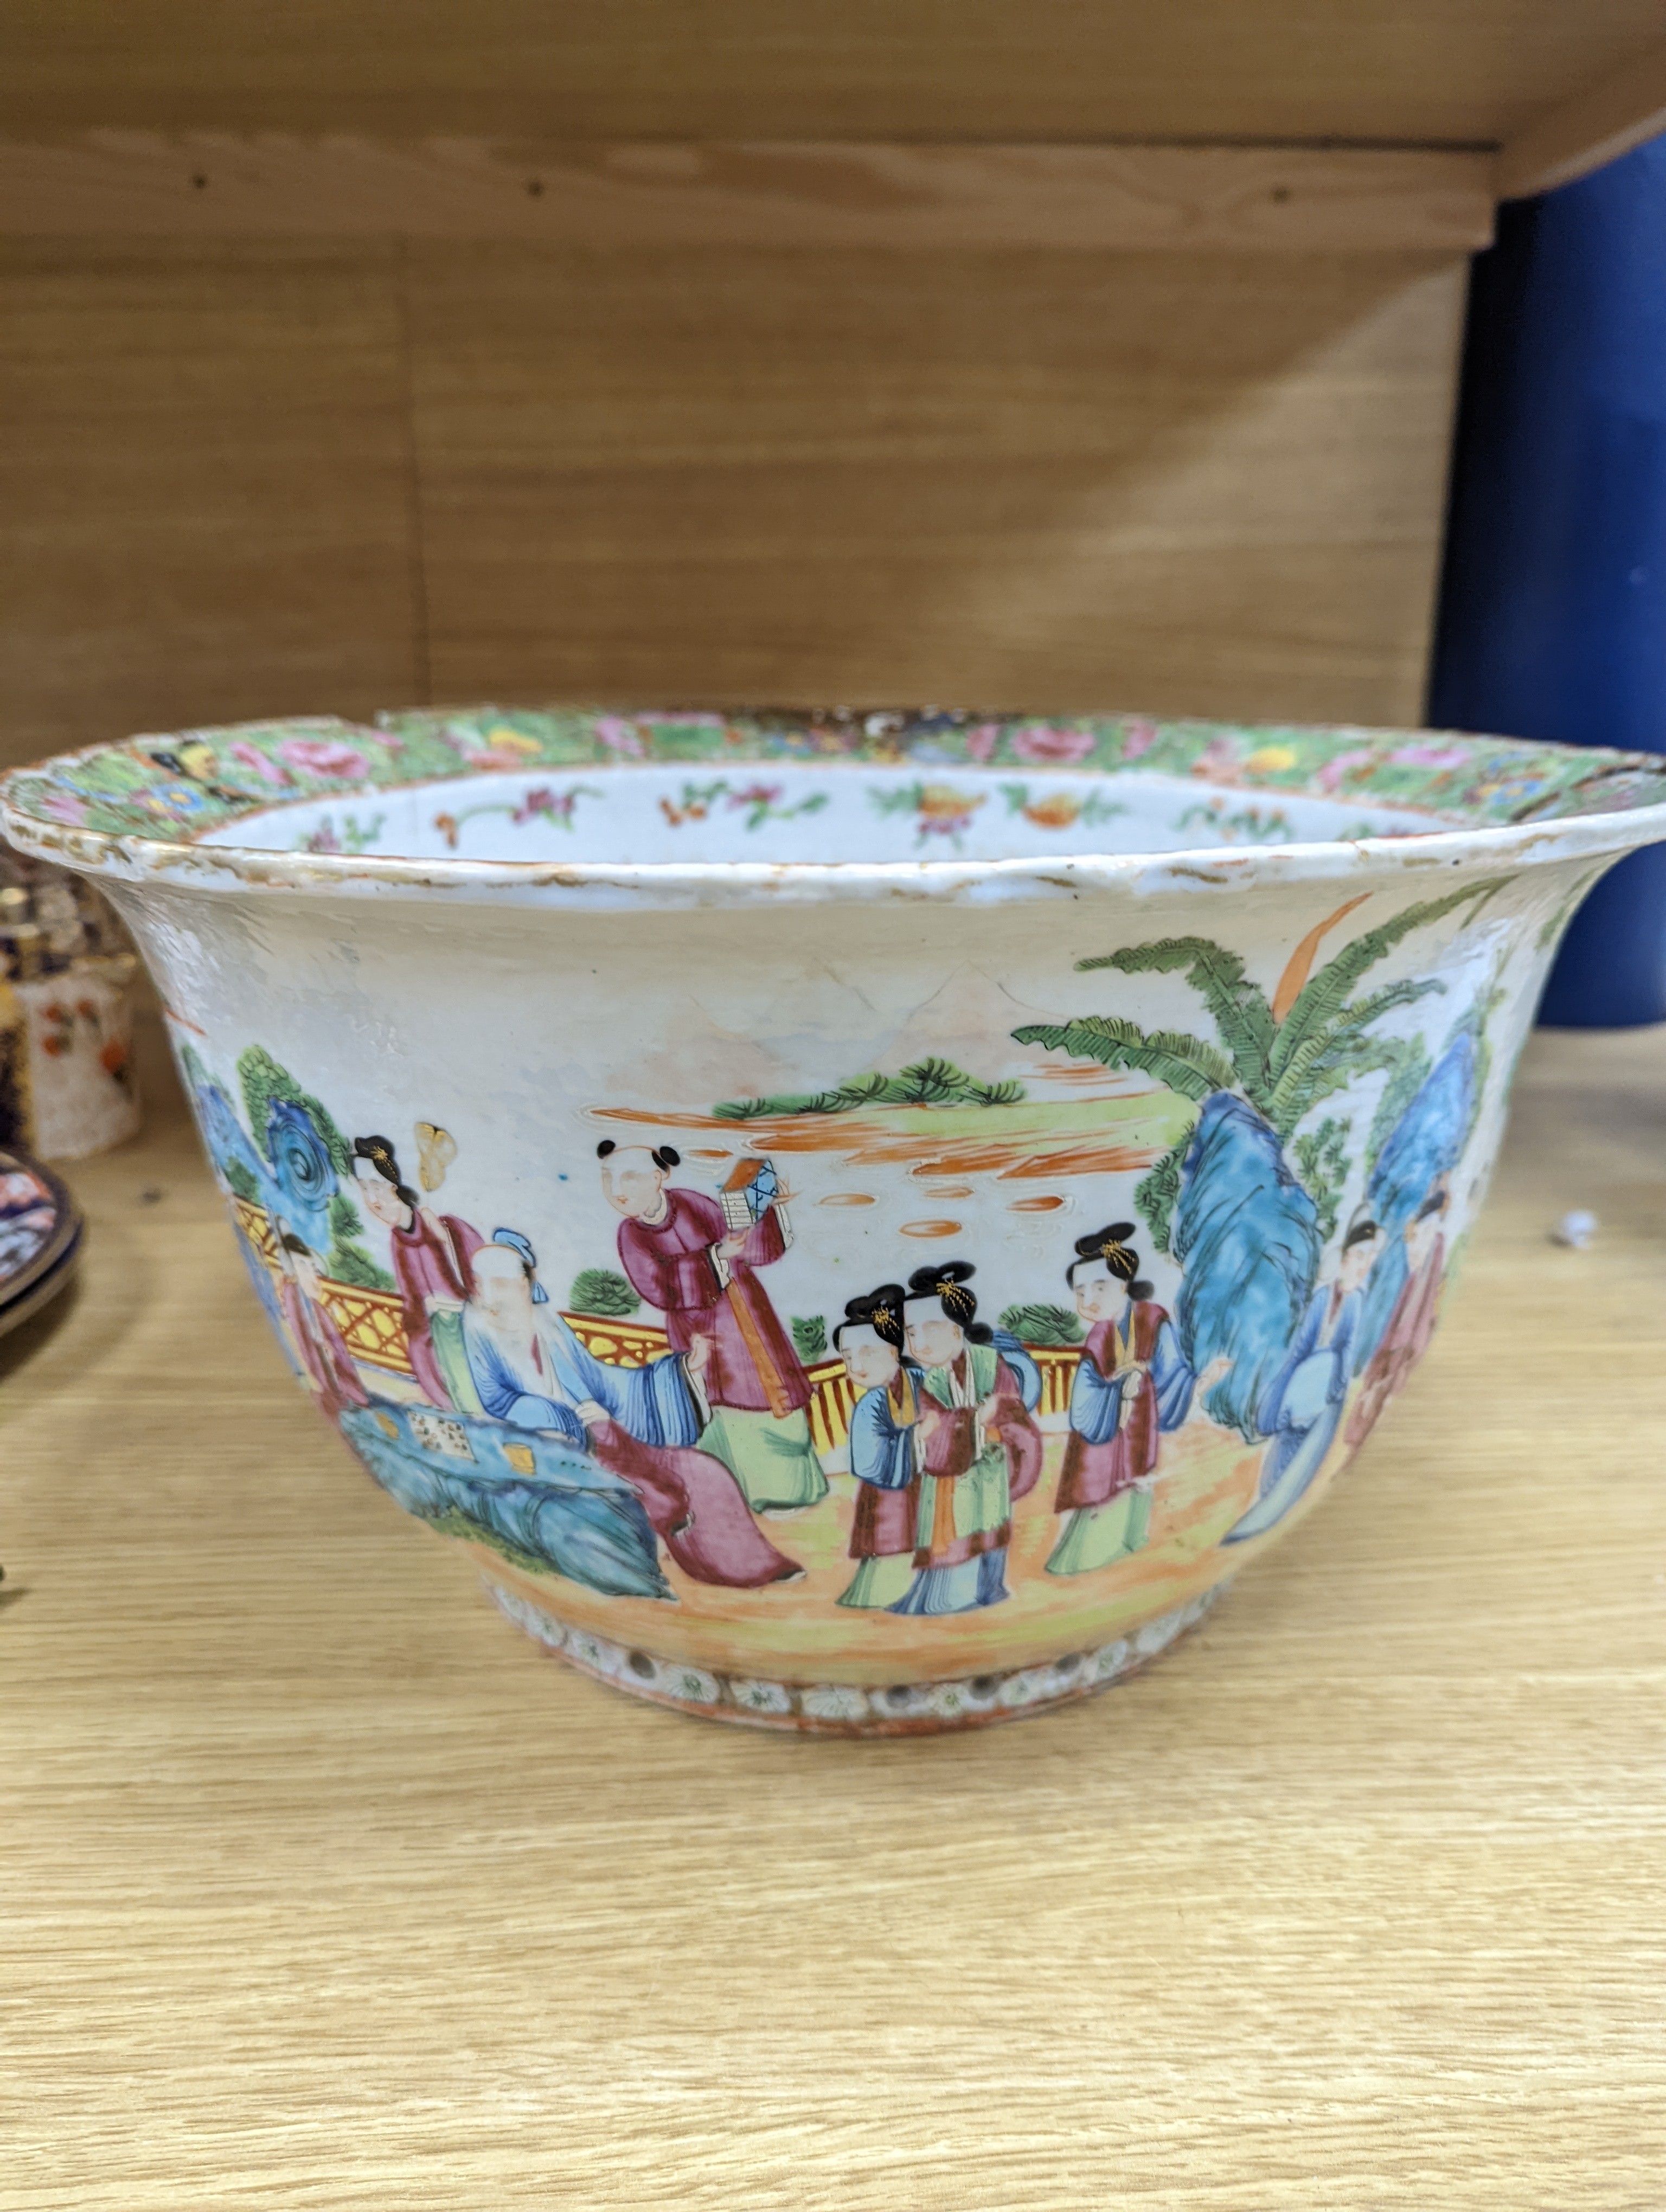 A Large Chinese famille rose flower pot, mid 19th century, 38cm